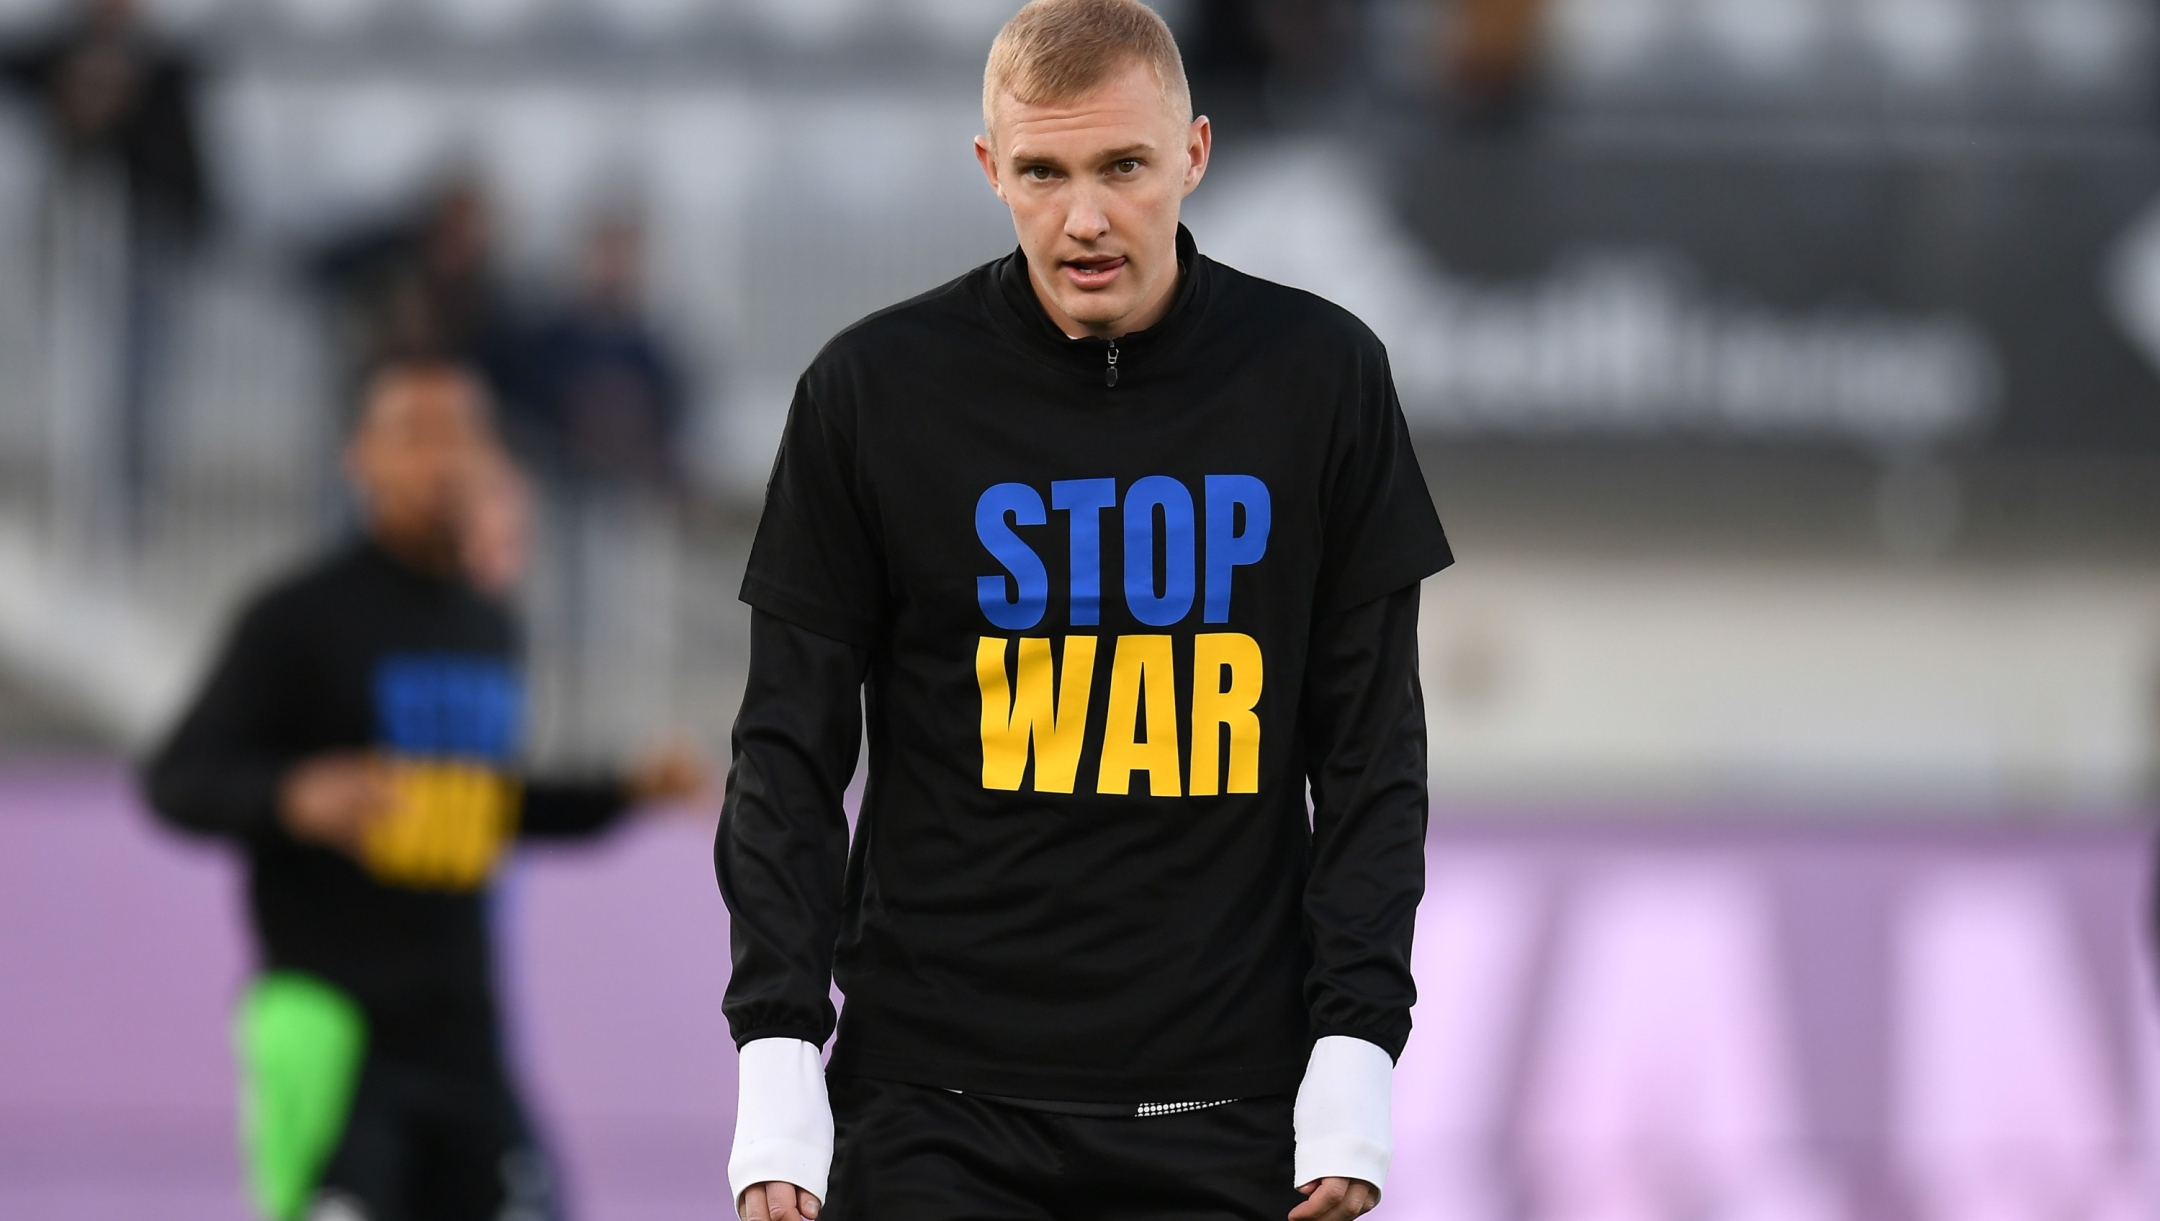 LA SPEZIA, ITALY - FEBRUARY 27: Viktor Kovalenko of Spezia Calcio wear the shirt with the message" STOP WAR NOW "during the warm-up before the Serie A match between Spezia Calcio and AS Roma at Stadio Alberto Picco on February 27, 2022 in La Spezia, Italy. (Photo by Alessandro Sabattini/Getty Images)